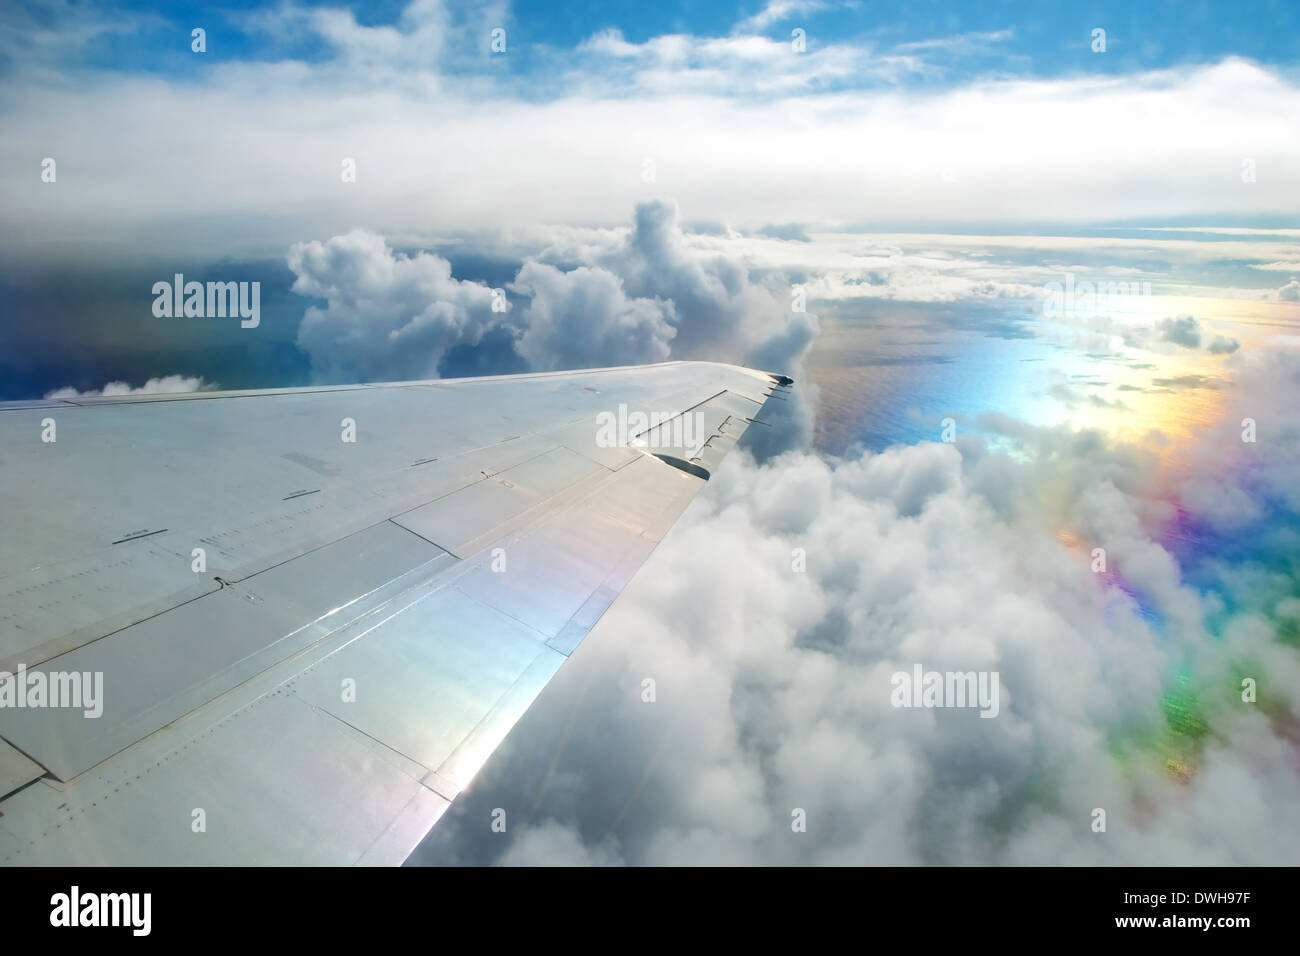 Wing of airplane flying above clouds in the sky and with a view of the ocean in background Stock Photo